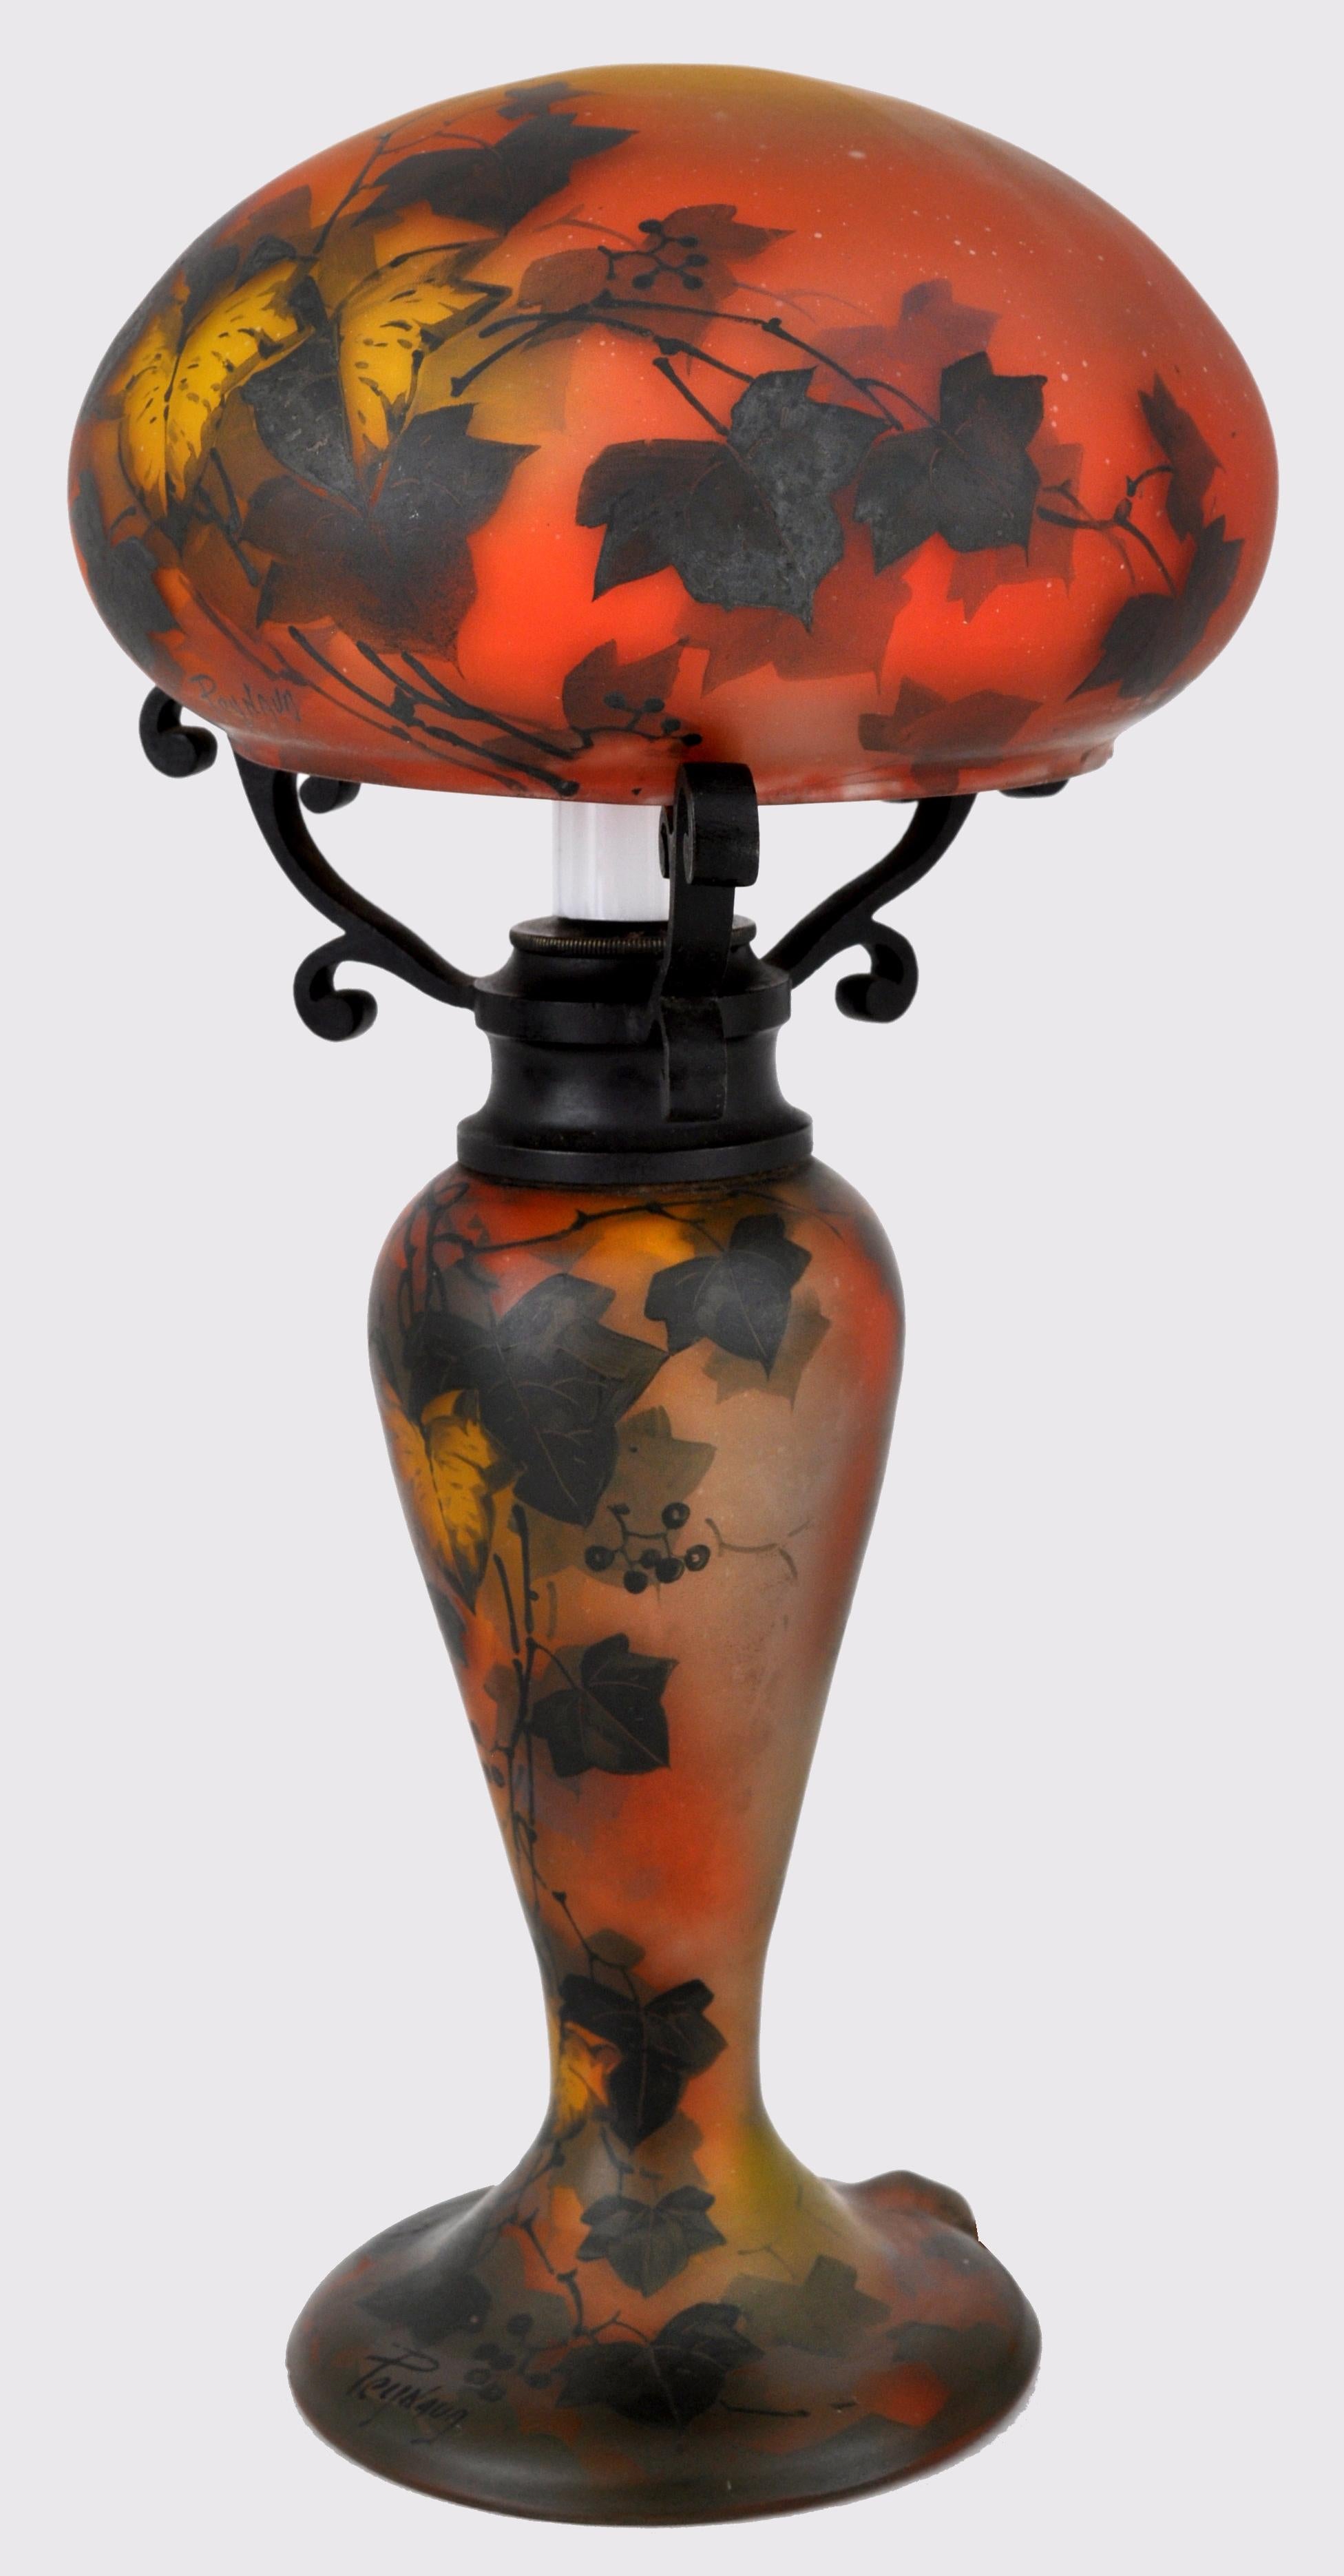 Antique Art Nouveau hand painted 'Mushroom' cameo glass lamp by Jean-Simon (Jany) Peynaud (French, 1869-1952), circa 1915. The lamp of a mushroom-shaped form with a bun-shaped top and waisted base. The lamp having multi-layered glass and is hand